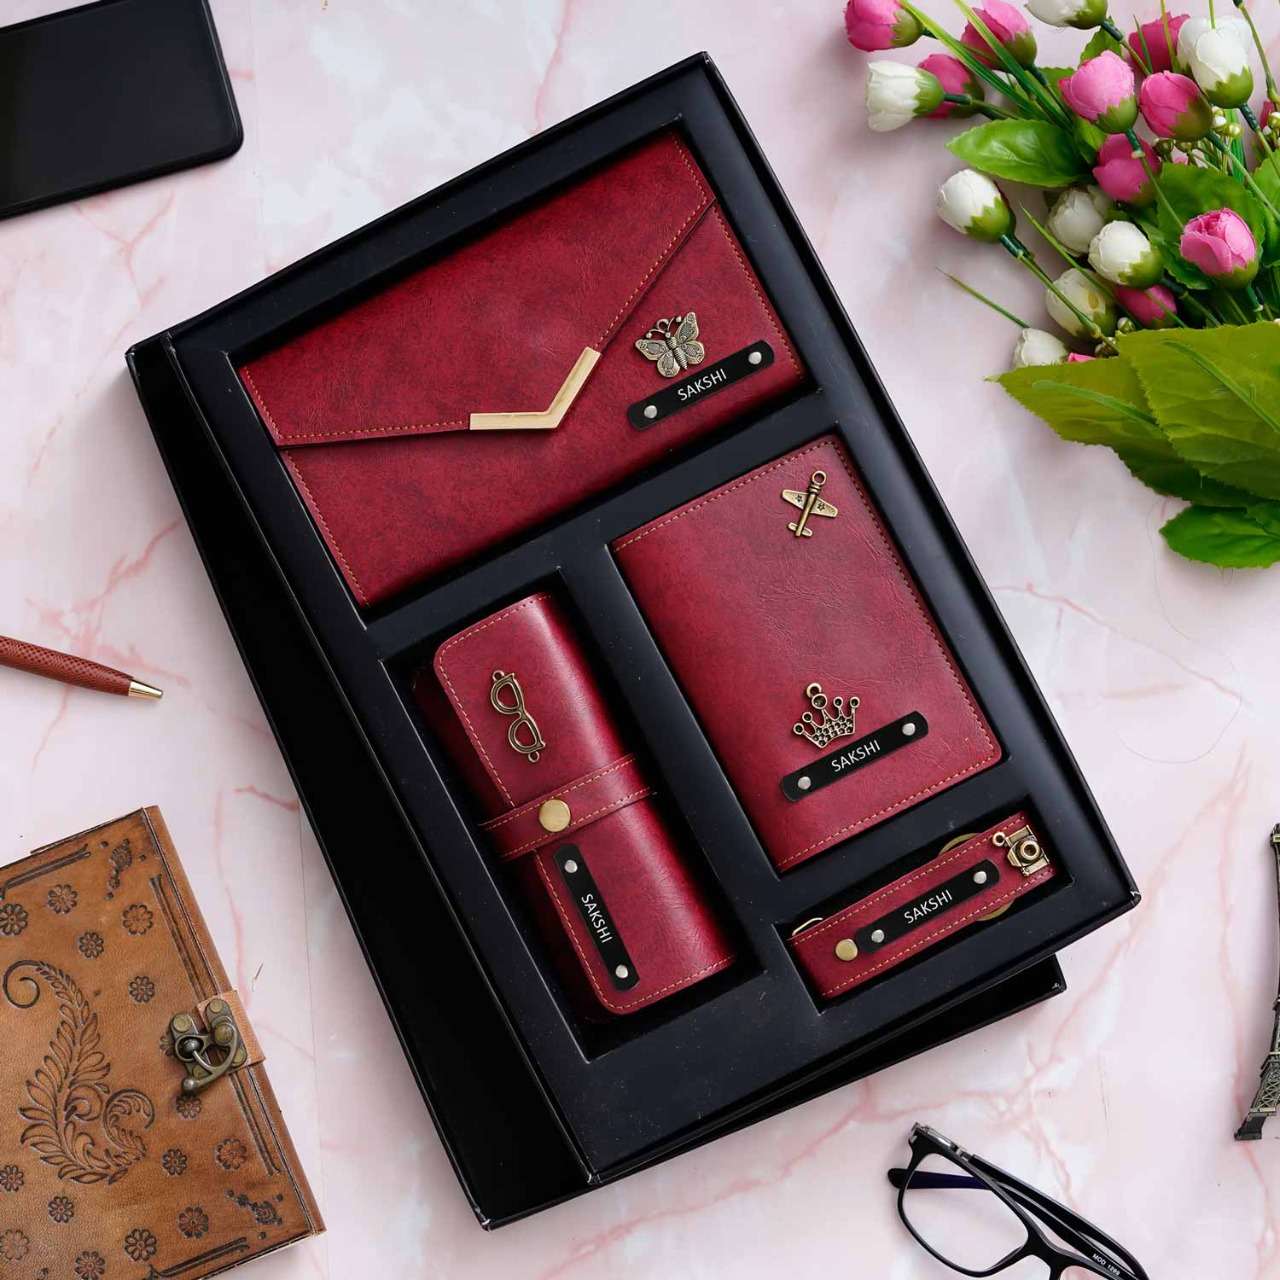 Cherry color gift set for women